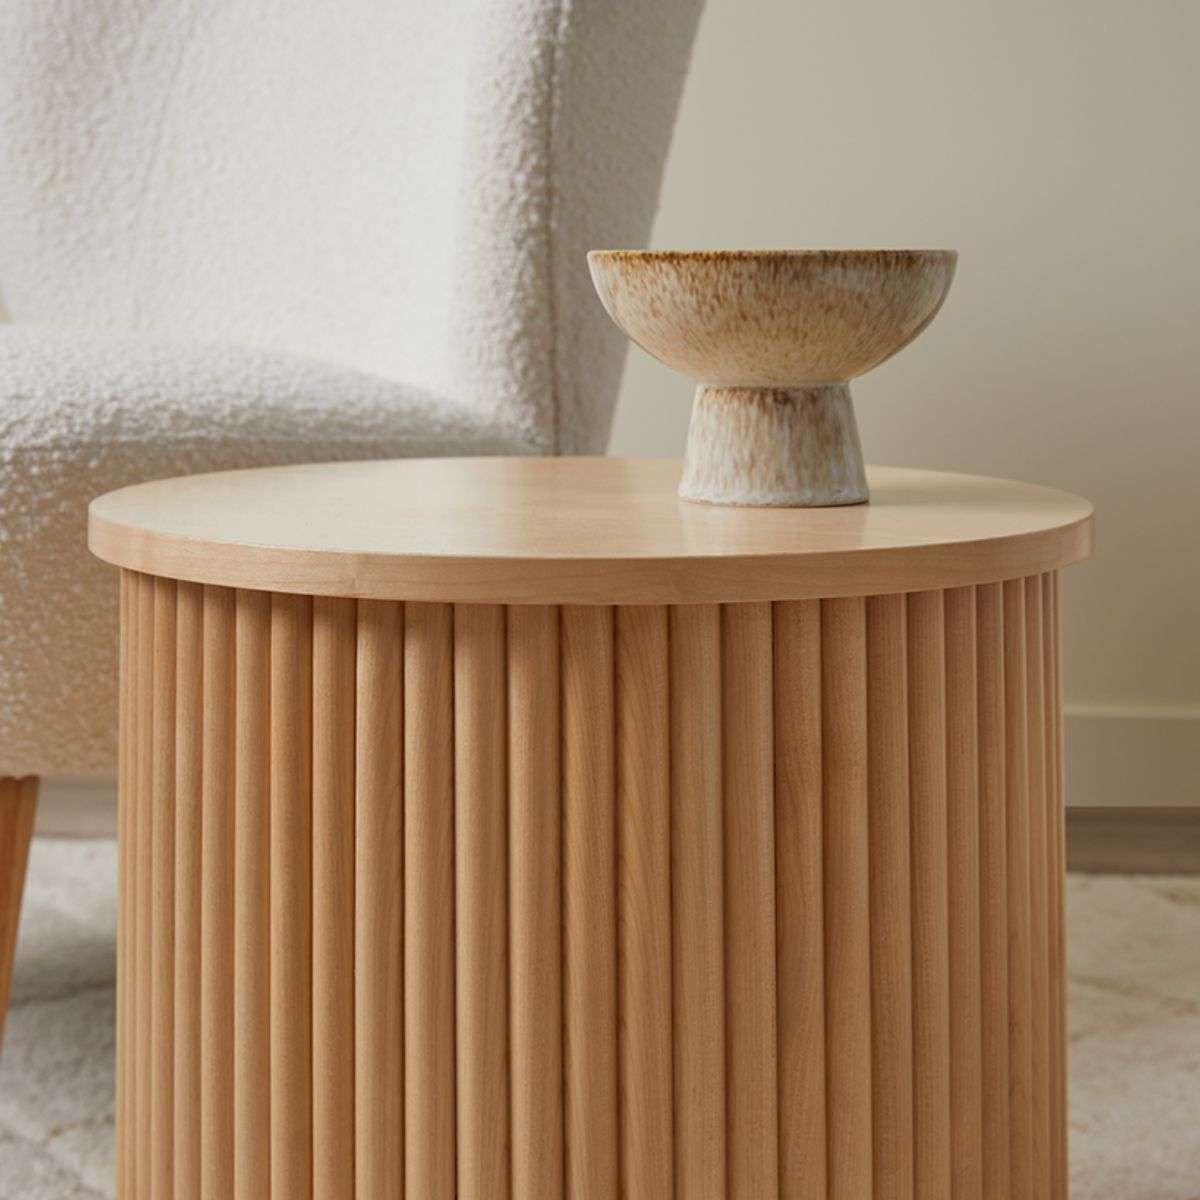 Eve Drum Side Table - Birch